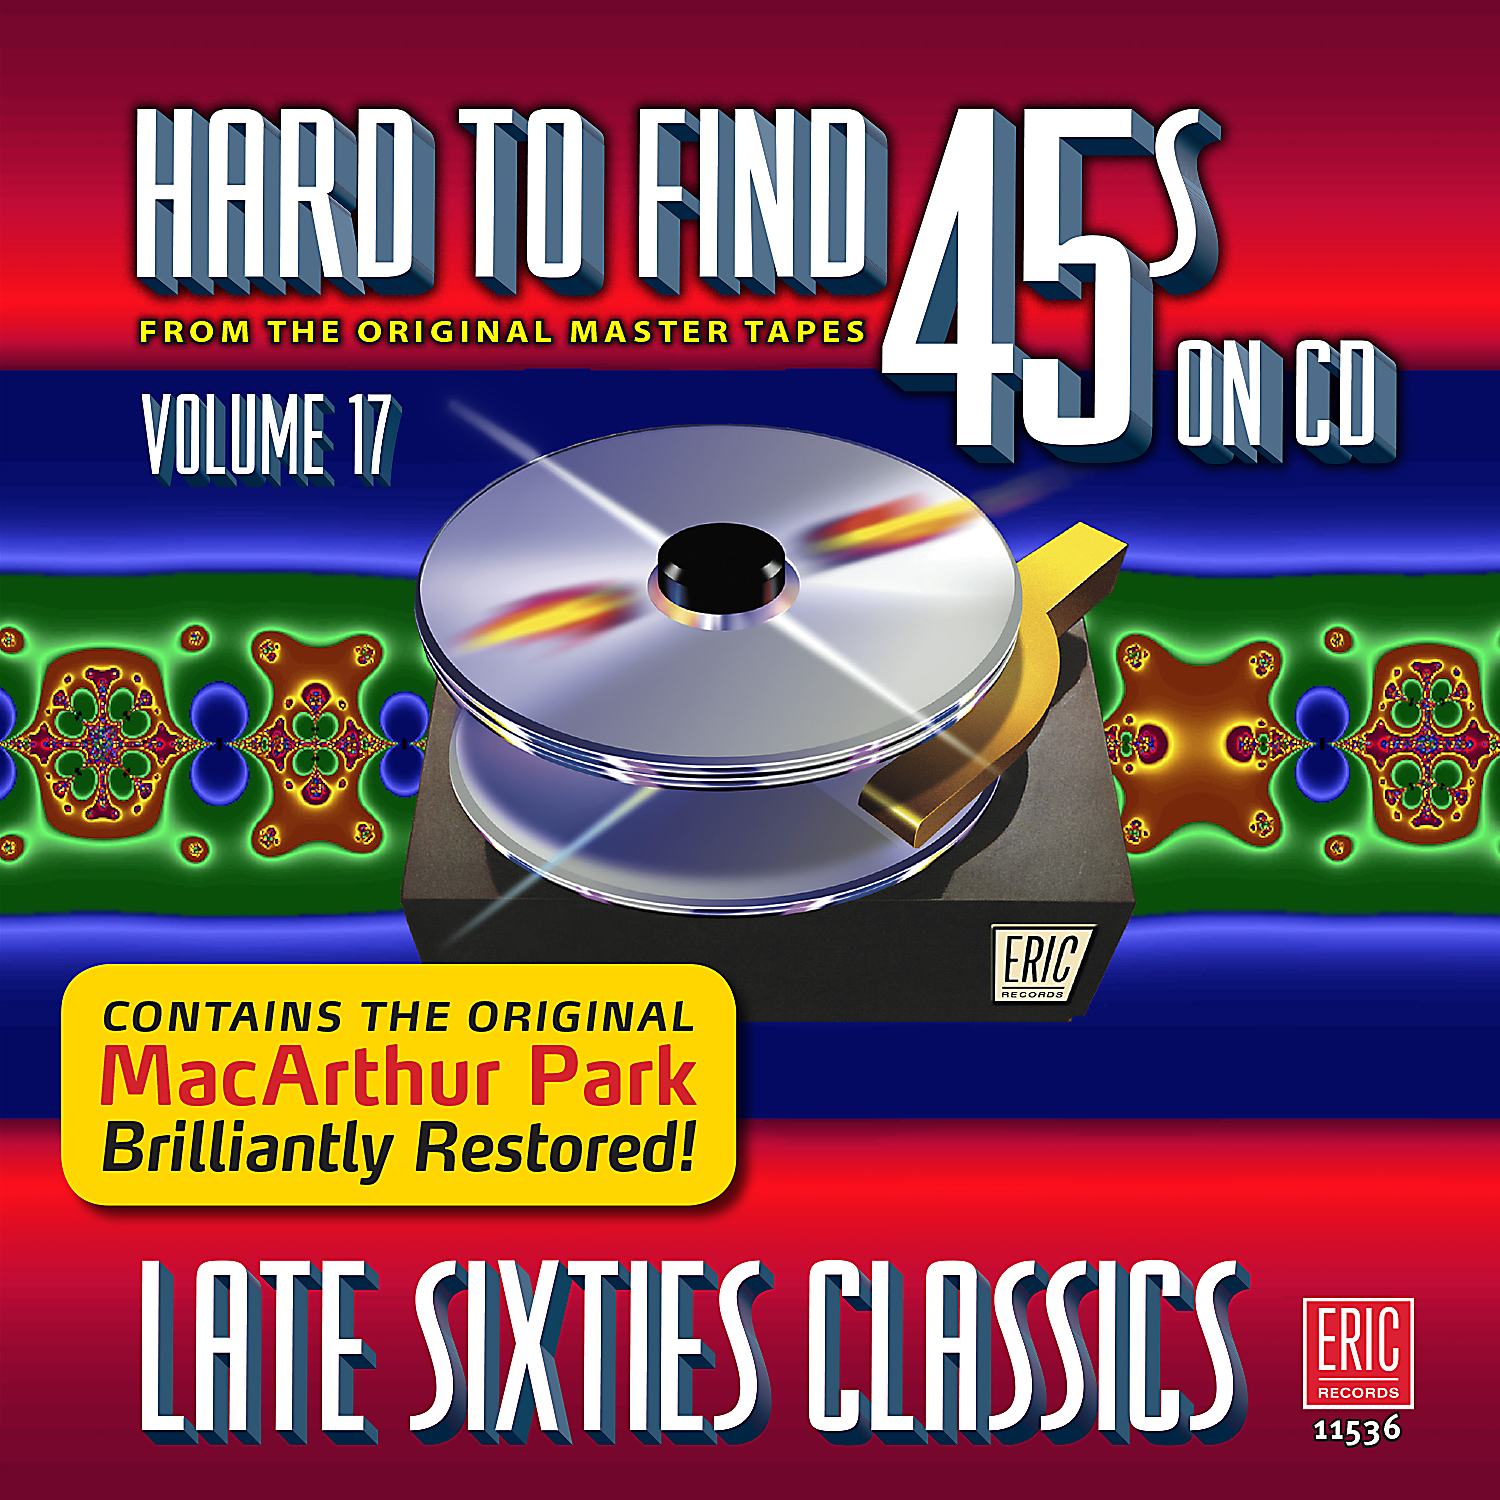 Hard To Find 45s On CD, Volume 17: Late Sixties Classics